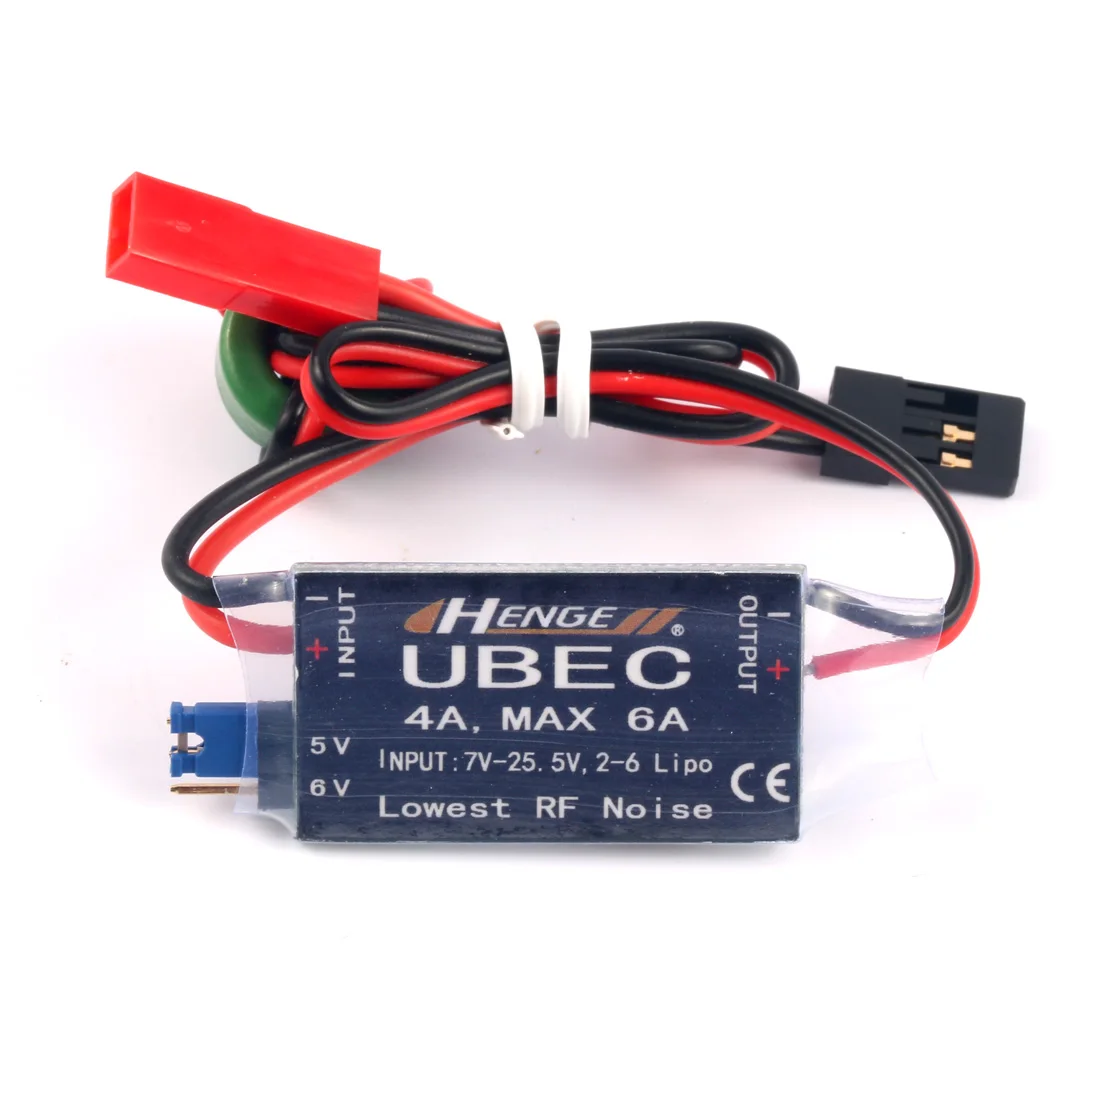 

HENGE 4A UBEC Input 7V-25.5V 2-6S Lipo Output 5V 6V Max 6A Switch Mode BEC for RC Helicopters Airplane Car Parts